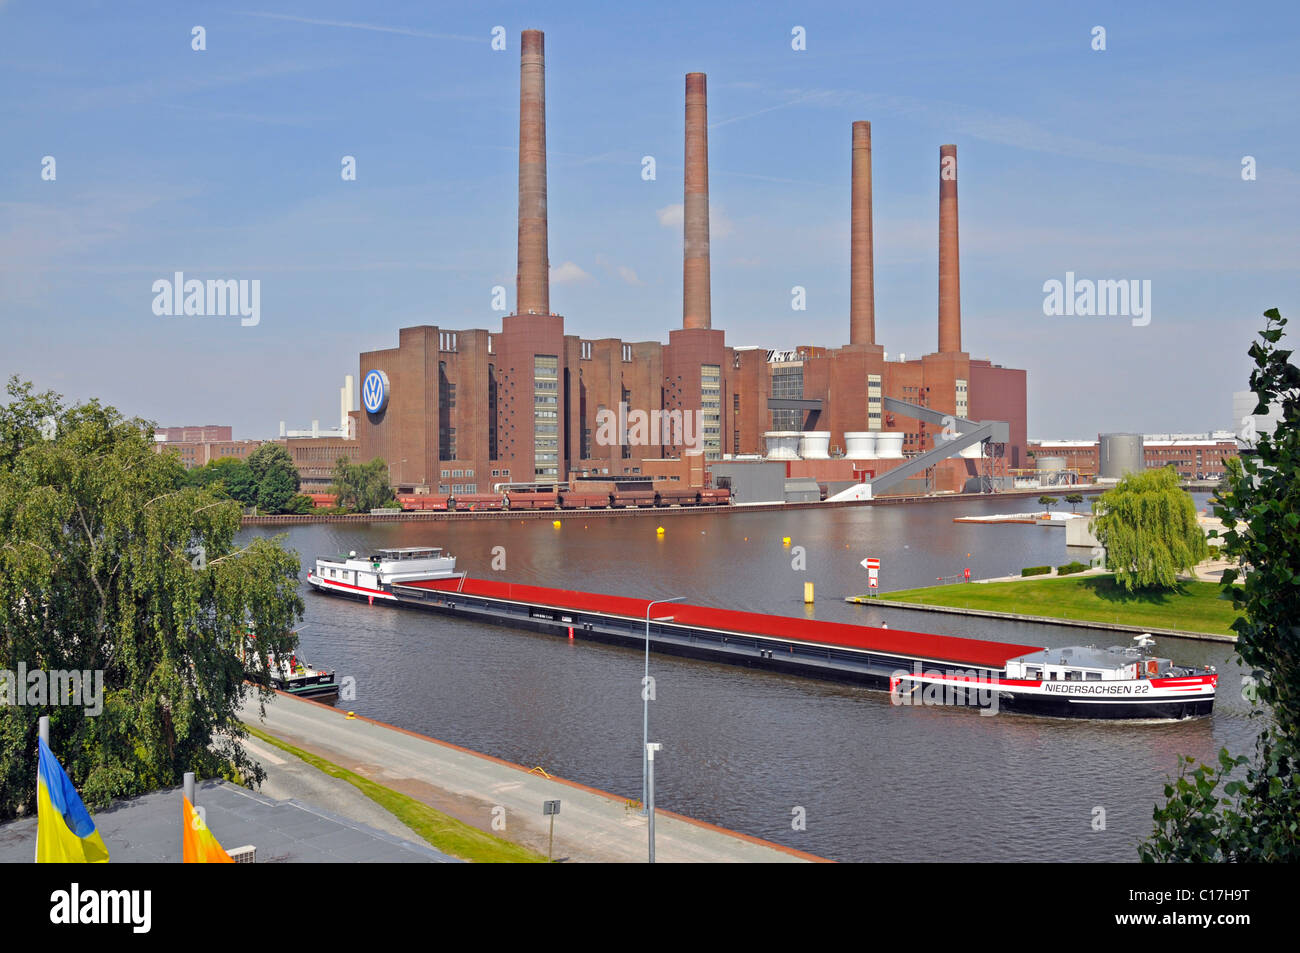 Mittellandkanal canal and the Volkswagen Group building, Wolfsburg, Lower Saxony, Germany, Europe Stock Photo